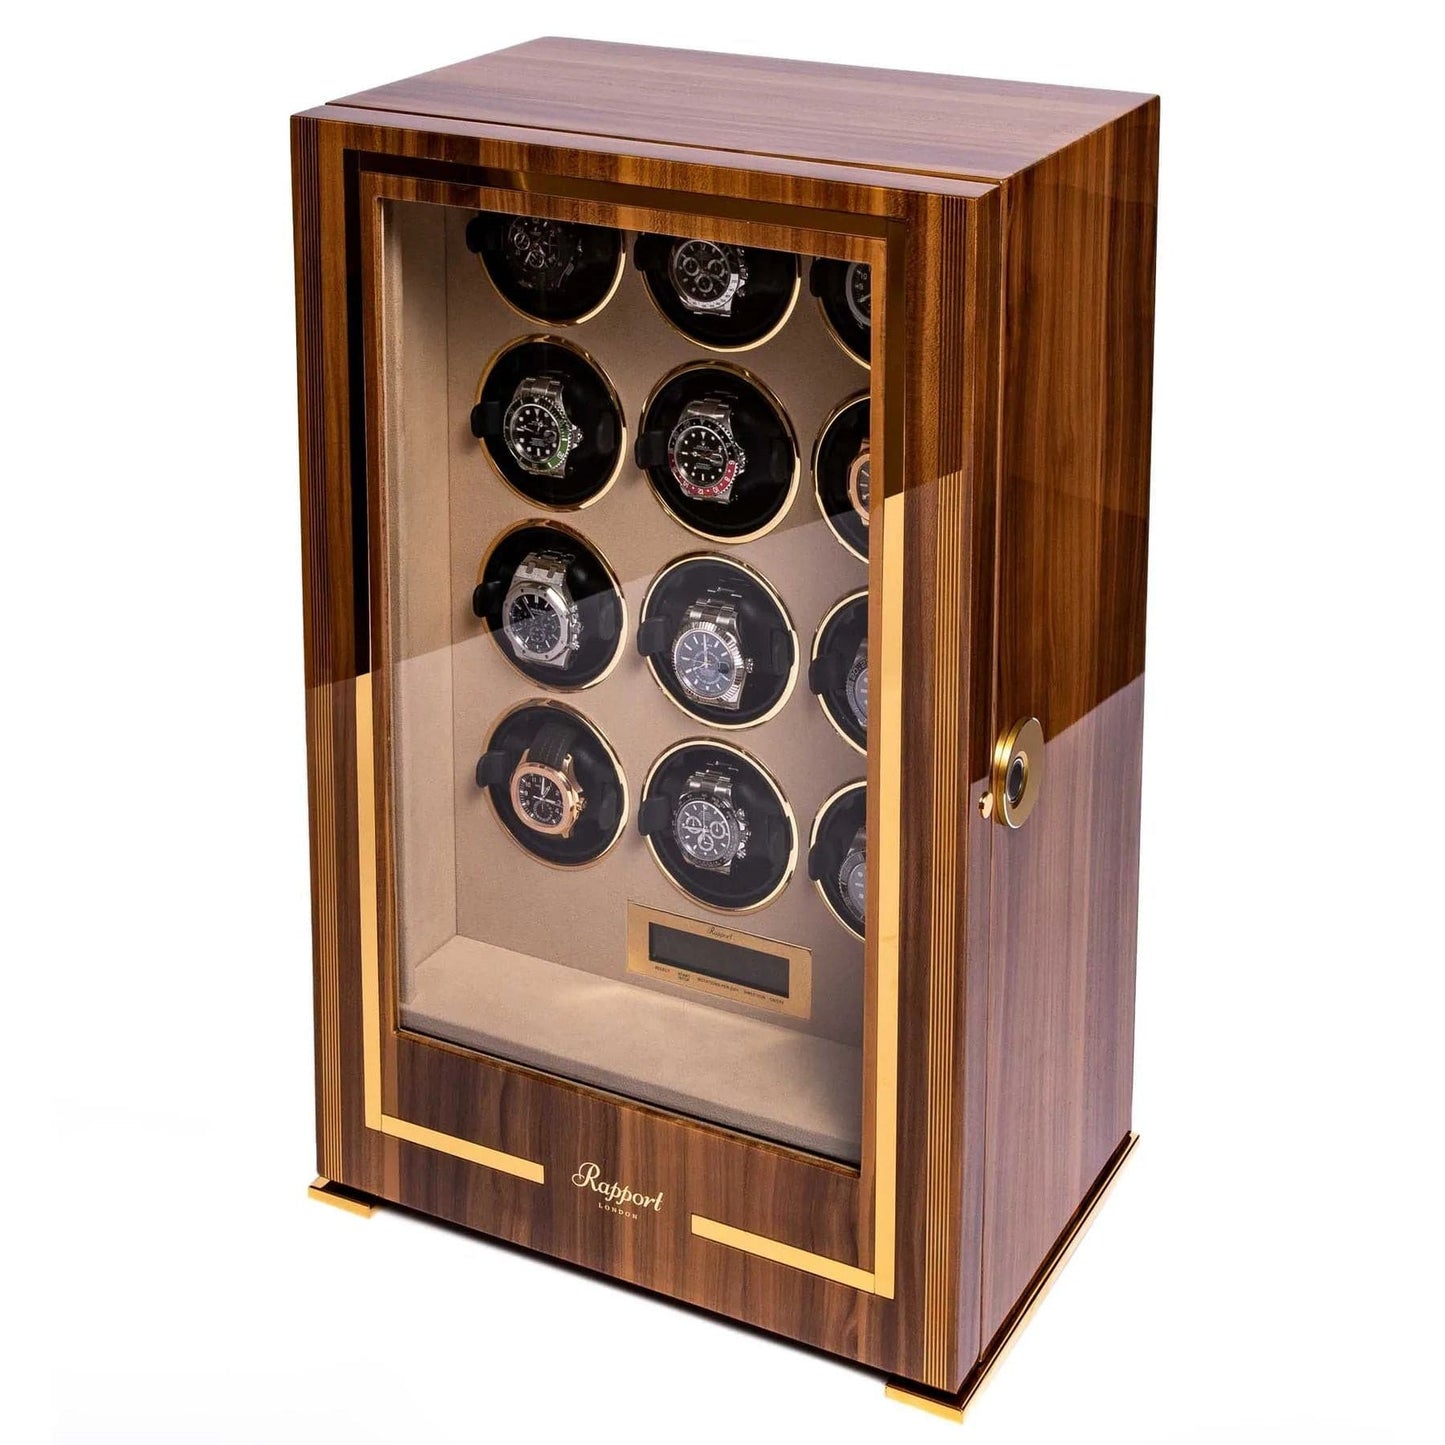 Paramount 12 Watch Winder - Walnut by  Rapport London |  Time Keeper.